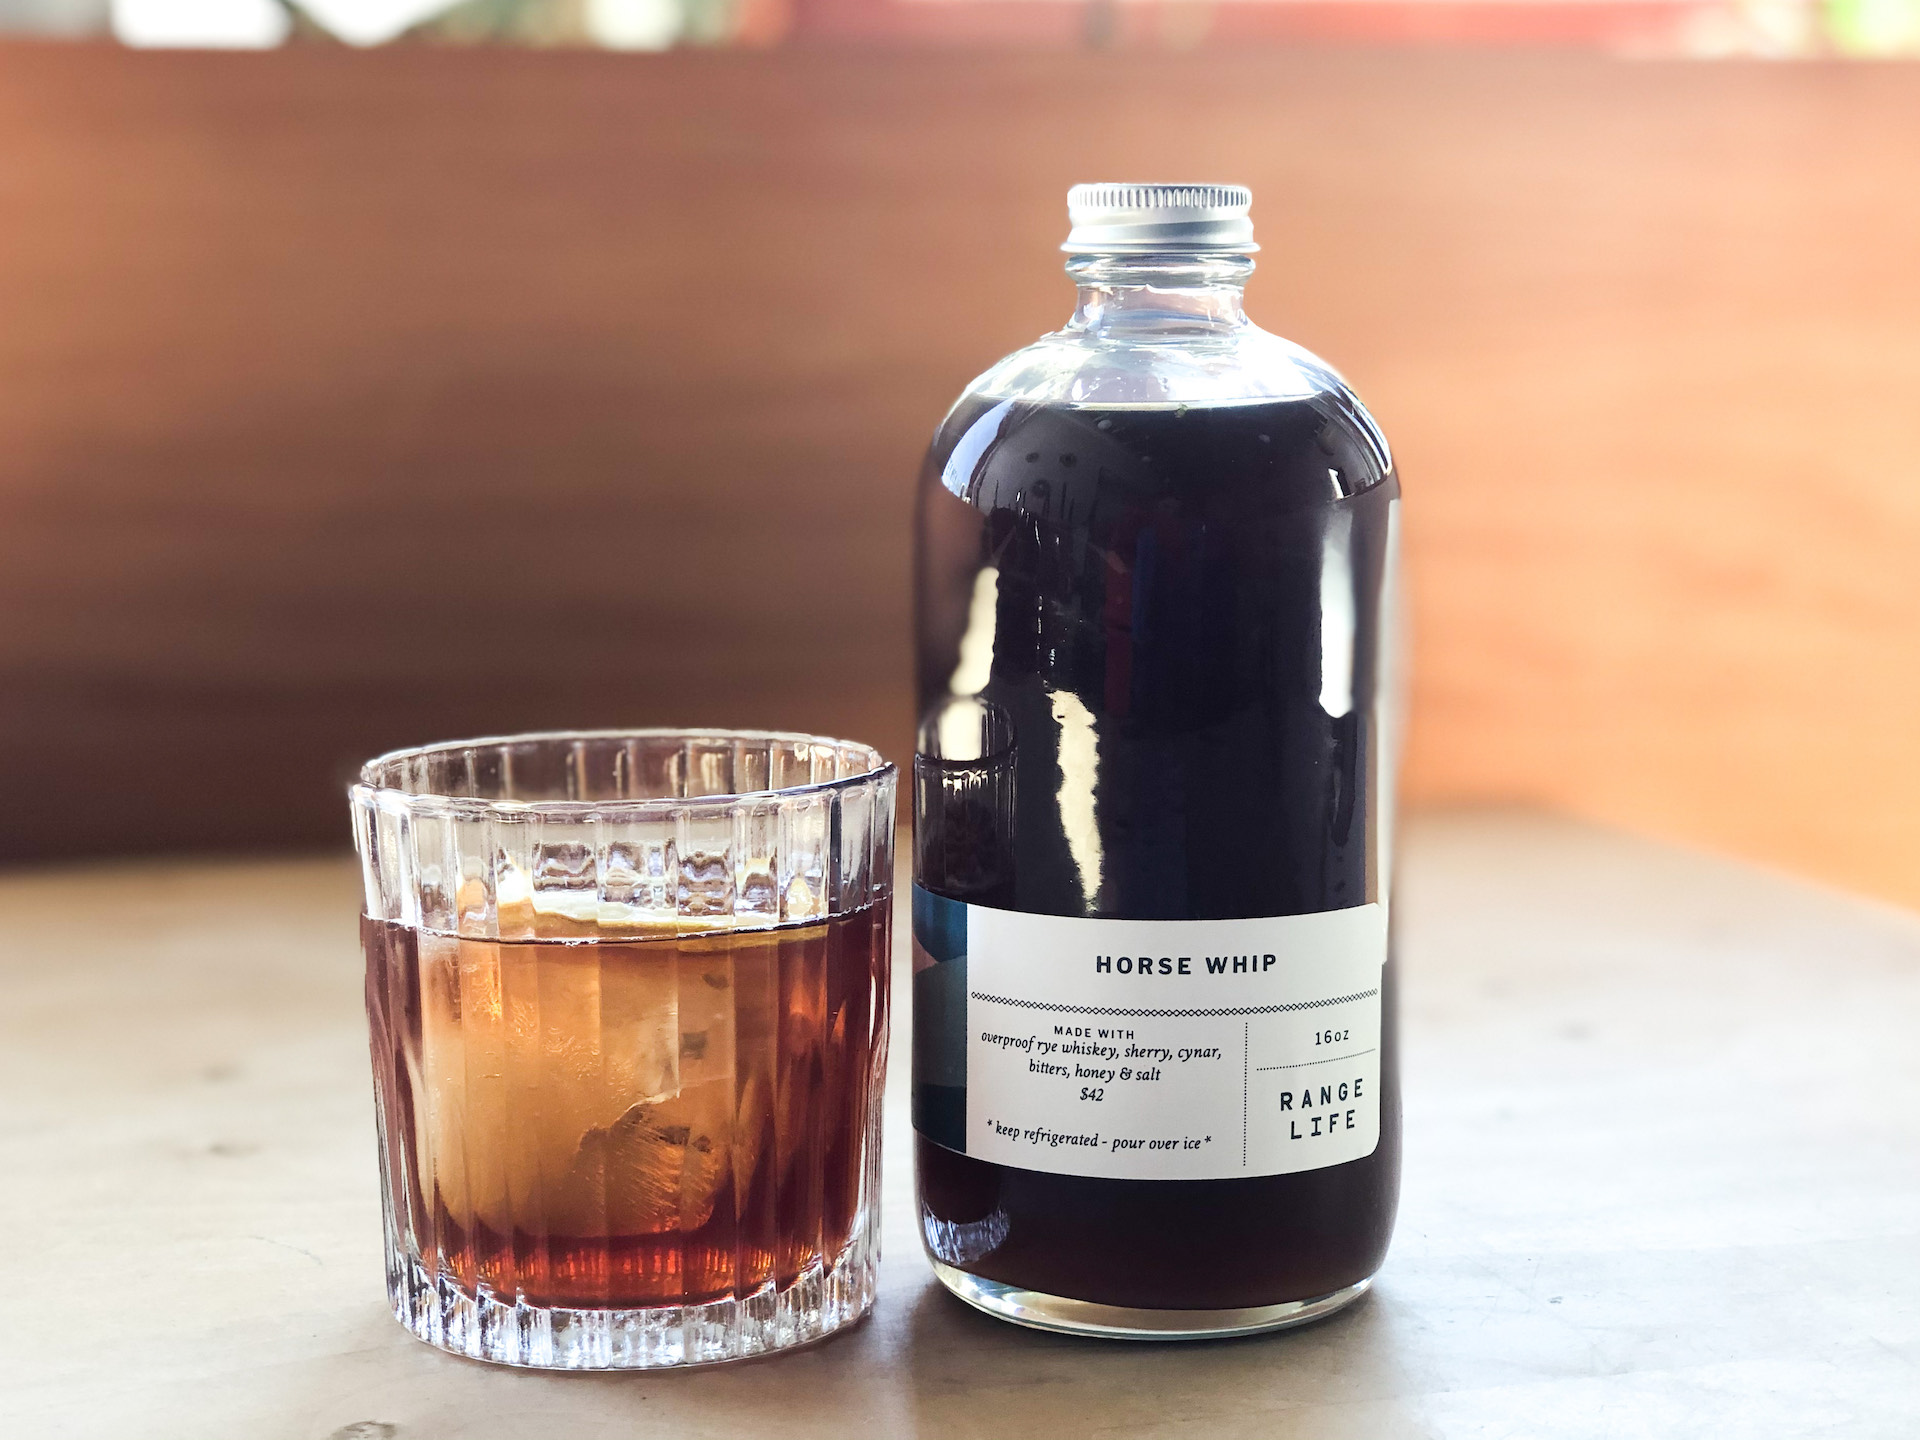 Range Life is offering takeout cocktail mixes including this boozy, butterscotch-laced slow sipper aptly titled Horse Whip. 